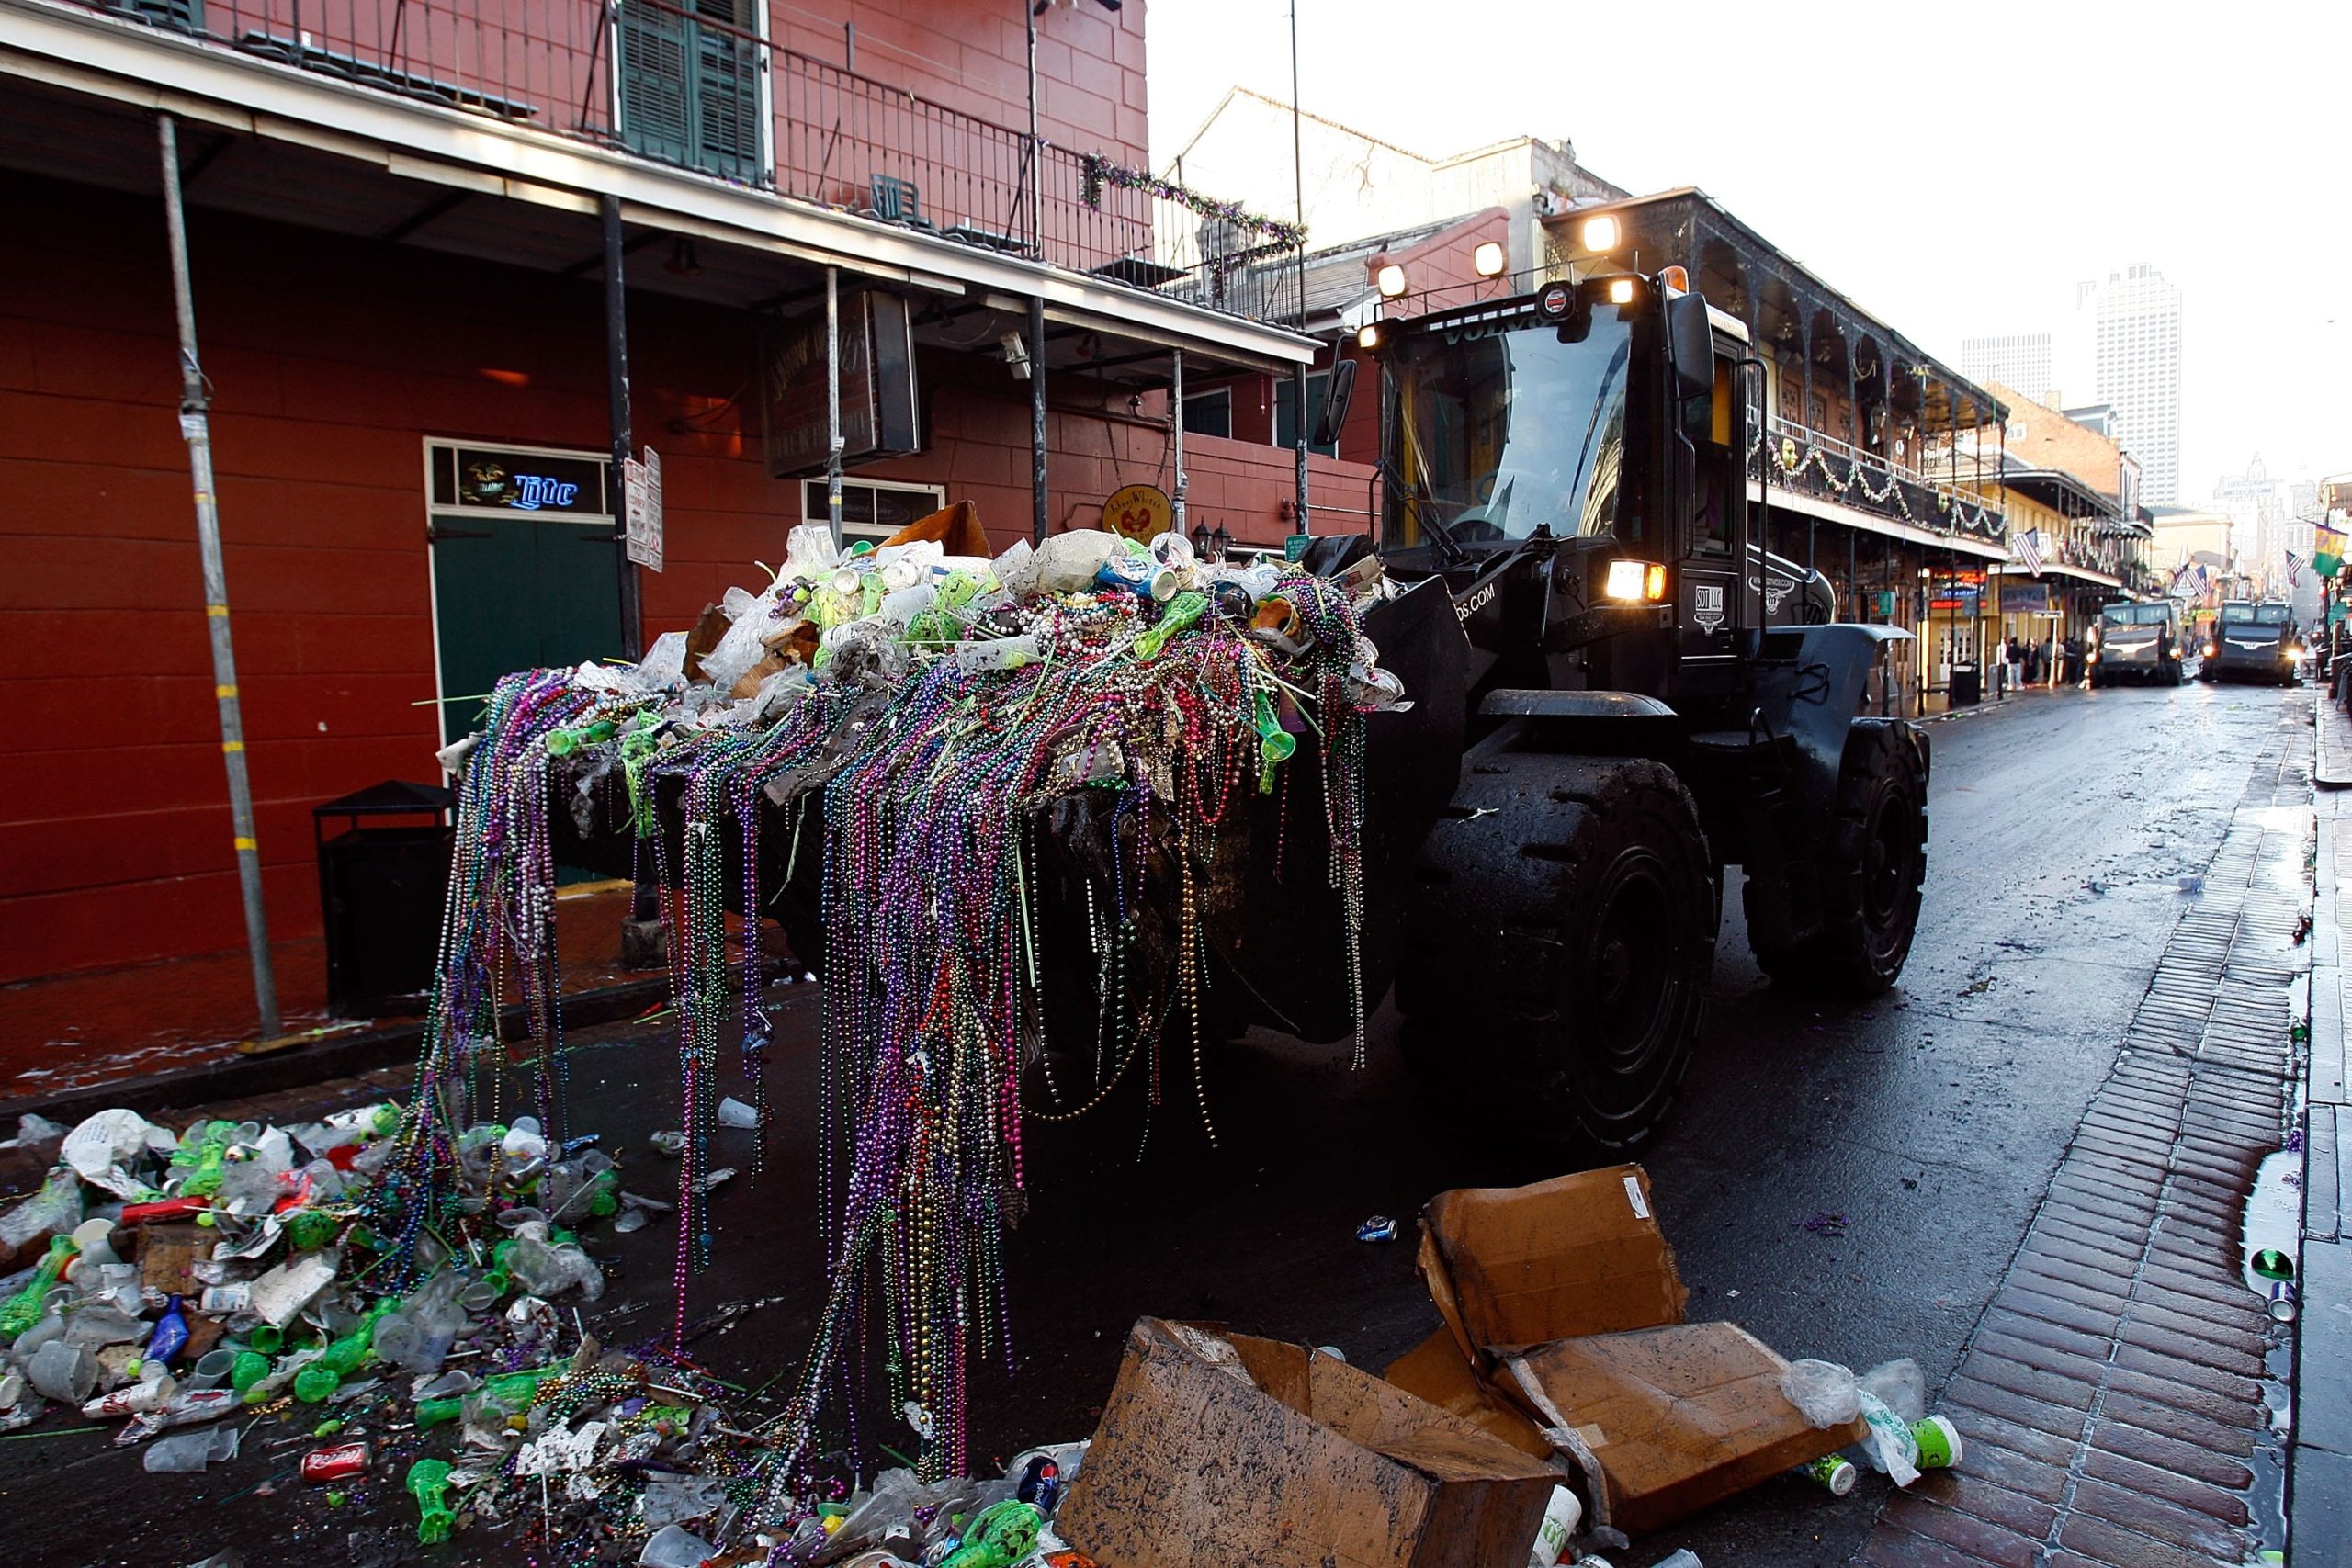 NEW ORLEANS - FEBRUARY 24:  Heavy construction equipment picks up trash from the night before to prepare for Mardi Gras day in the French Quarter on February 24, 2009 in New Orleans, Louisiana. The yearly celebration officially ends Tuesday at midnight.  (Photo by Chris Graythen/Getty Images)